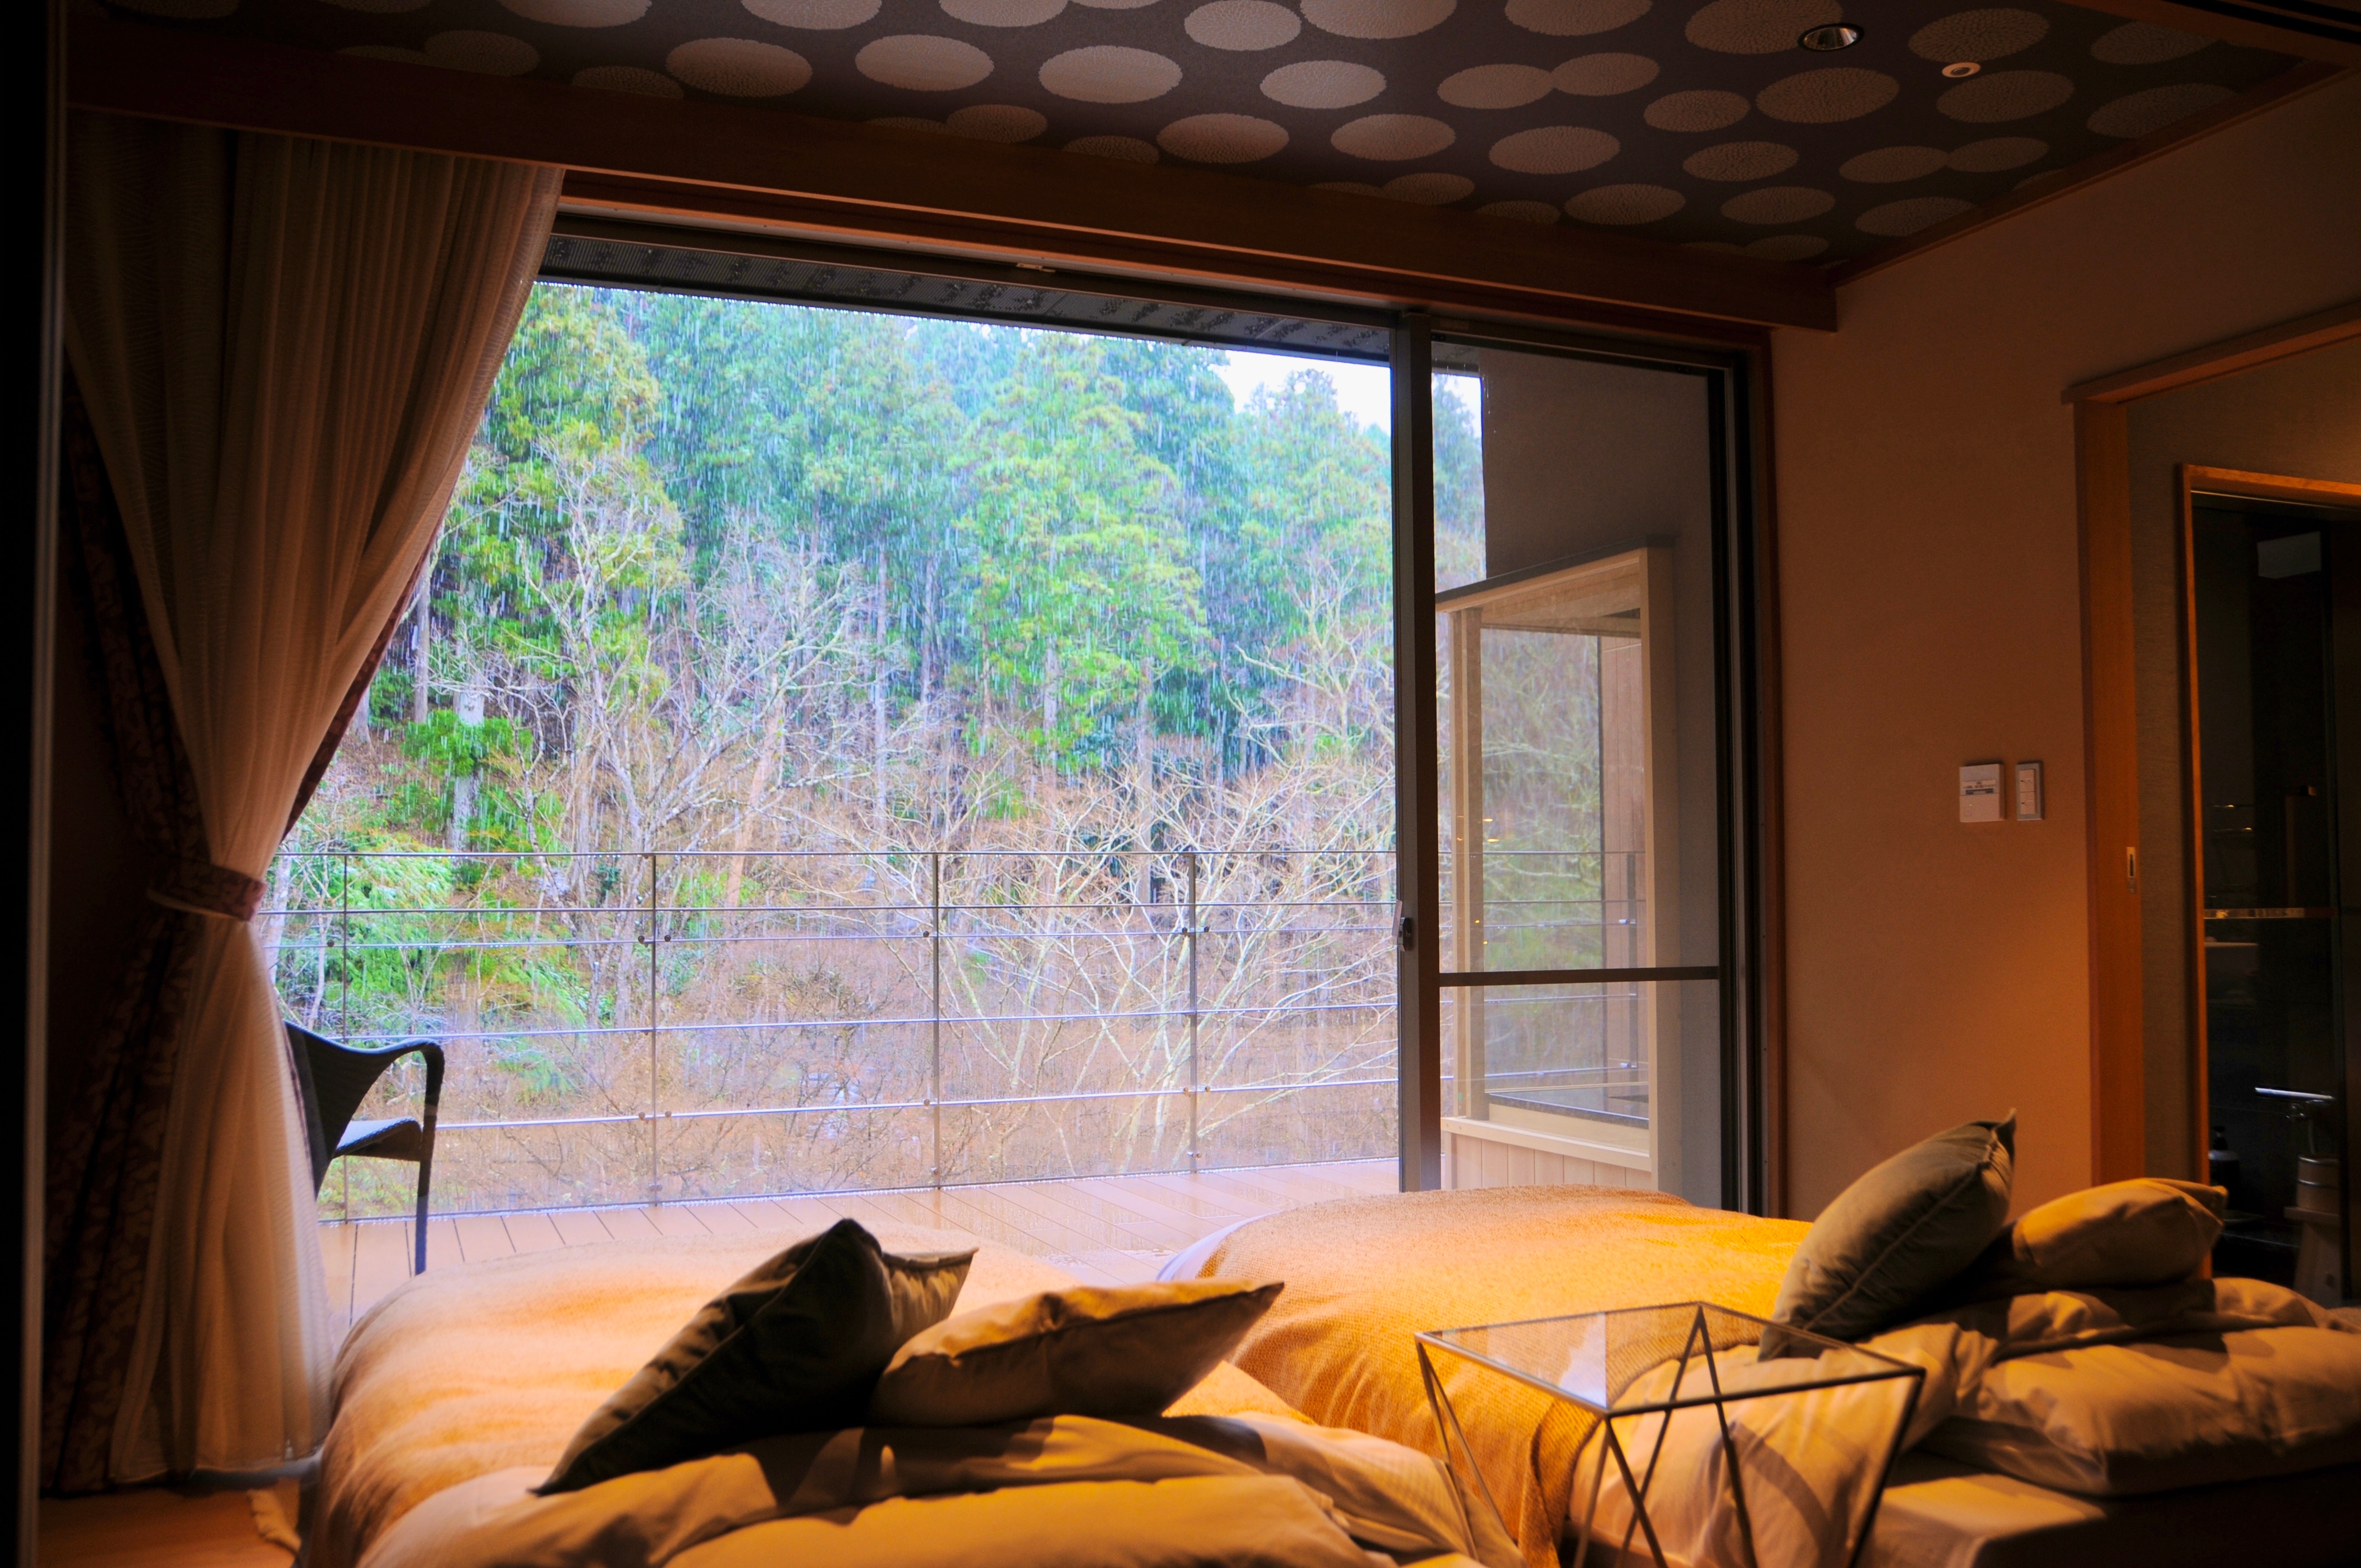 2022.1 January ☆ Celebration ☆ Upgraded room completed ♪ Semi-open-air hot spring & terrace + guest room with Japanese bed (image)